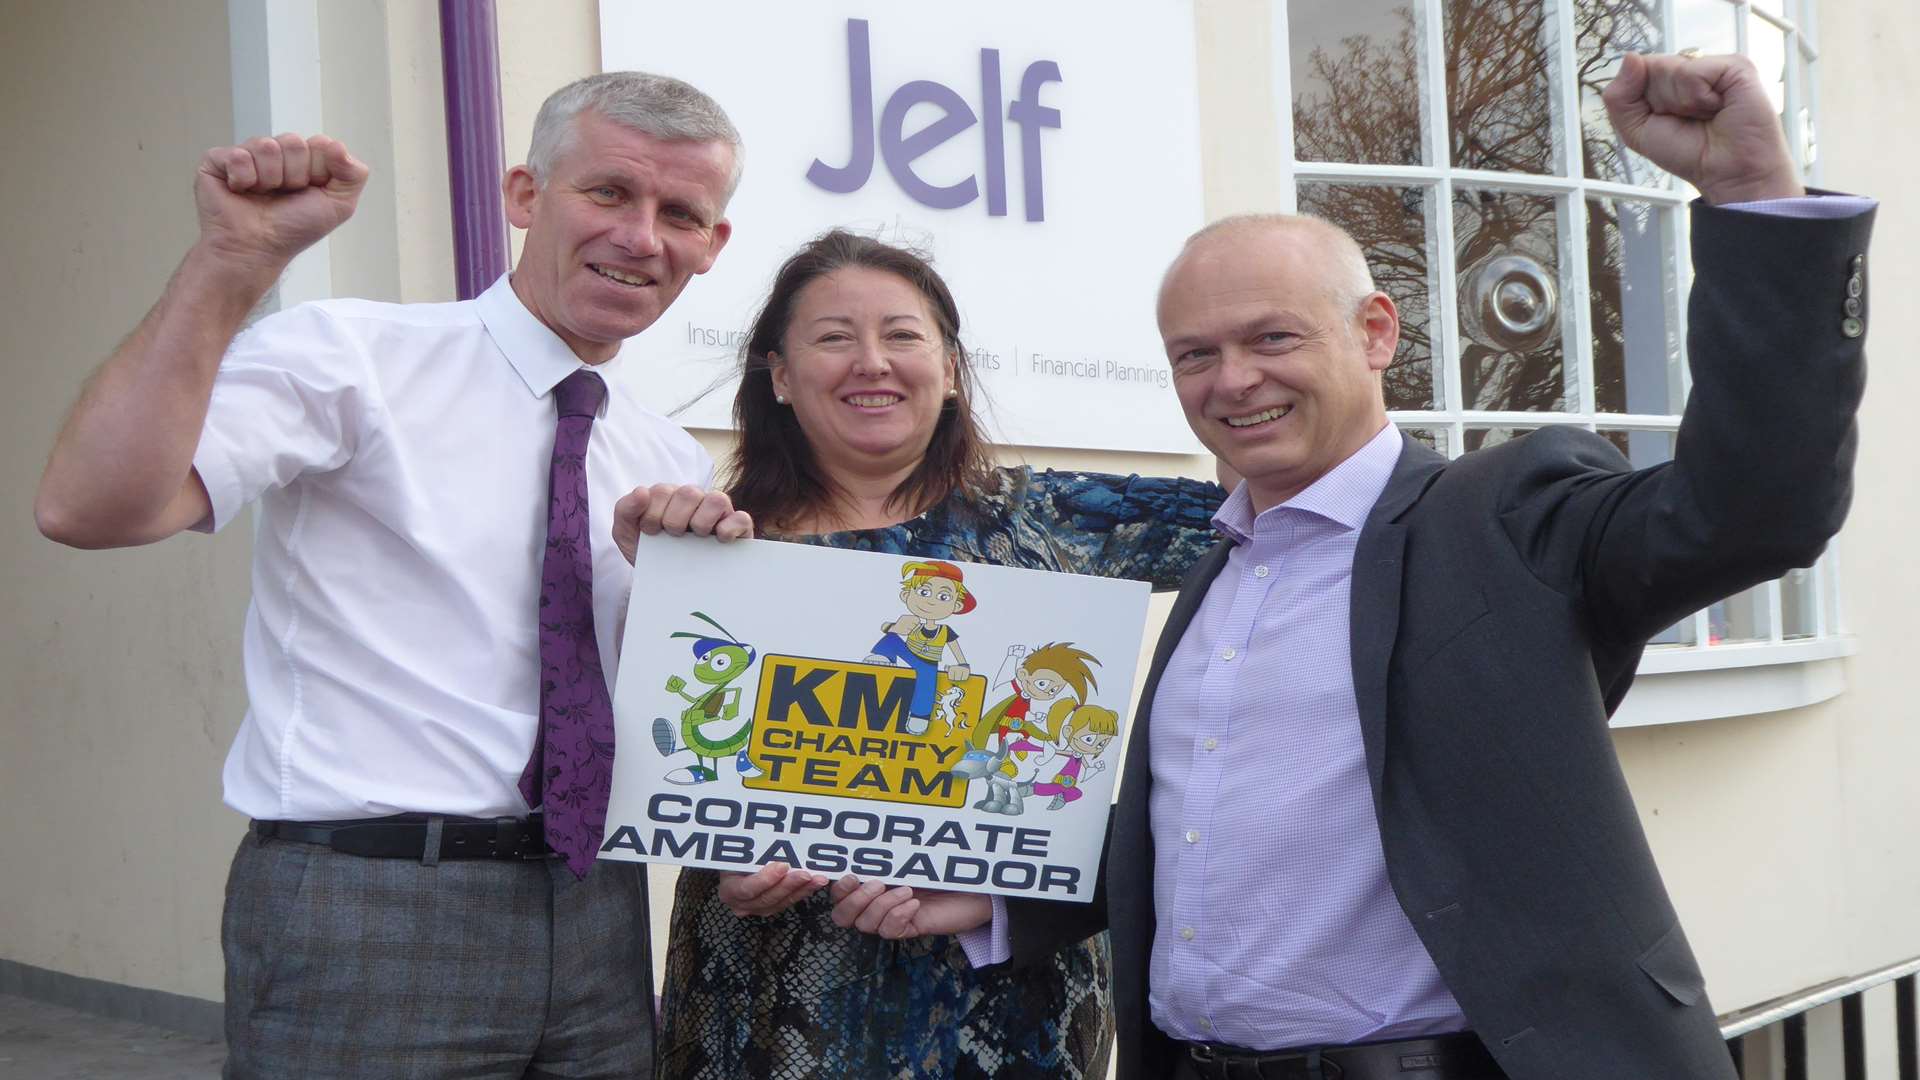 John Cox, Jane Lawrence, and Gareth Roberts of Jelf which is offering a year's free insurance for one lucky charity as a competition prize.